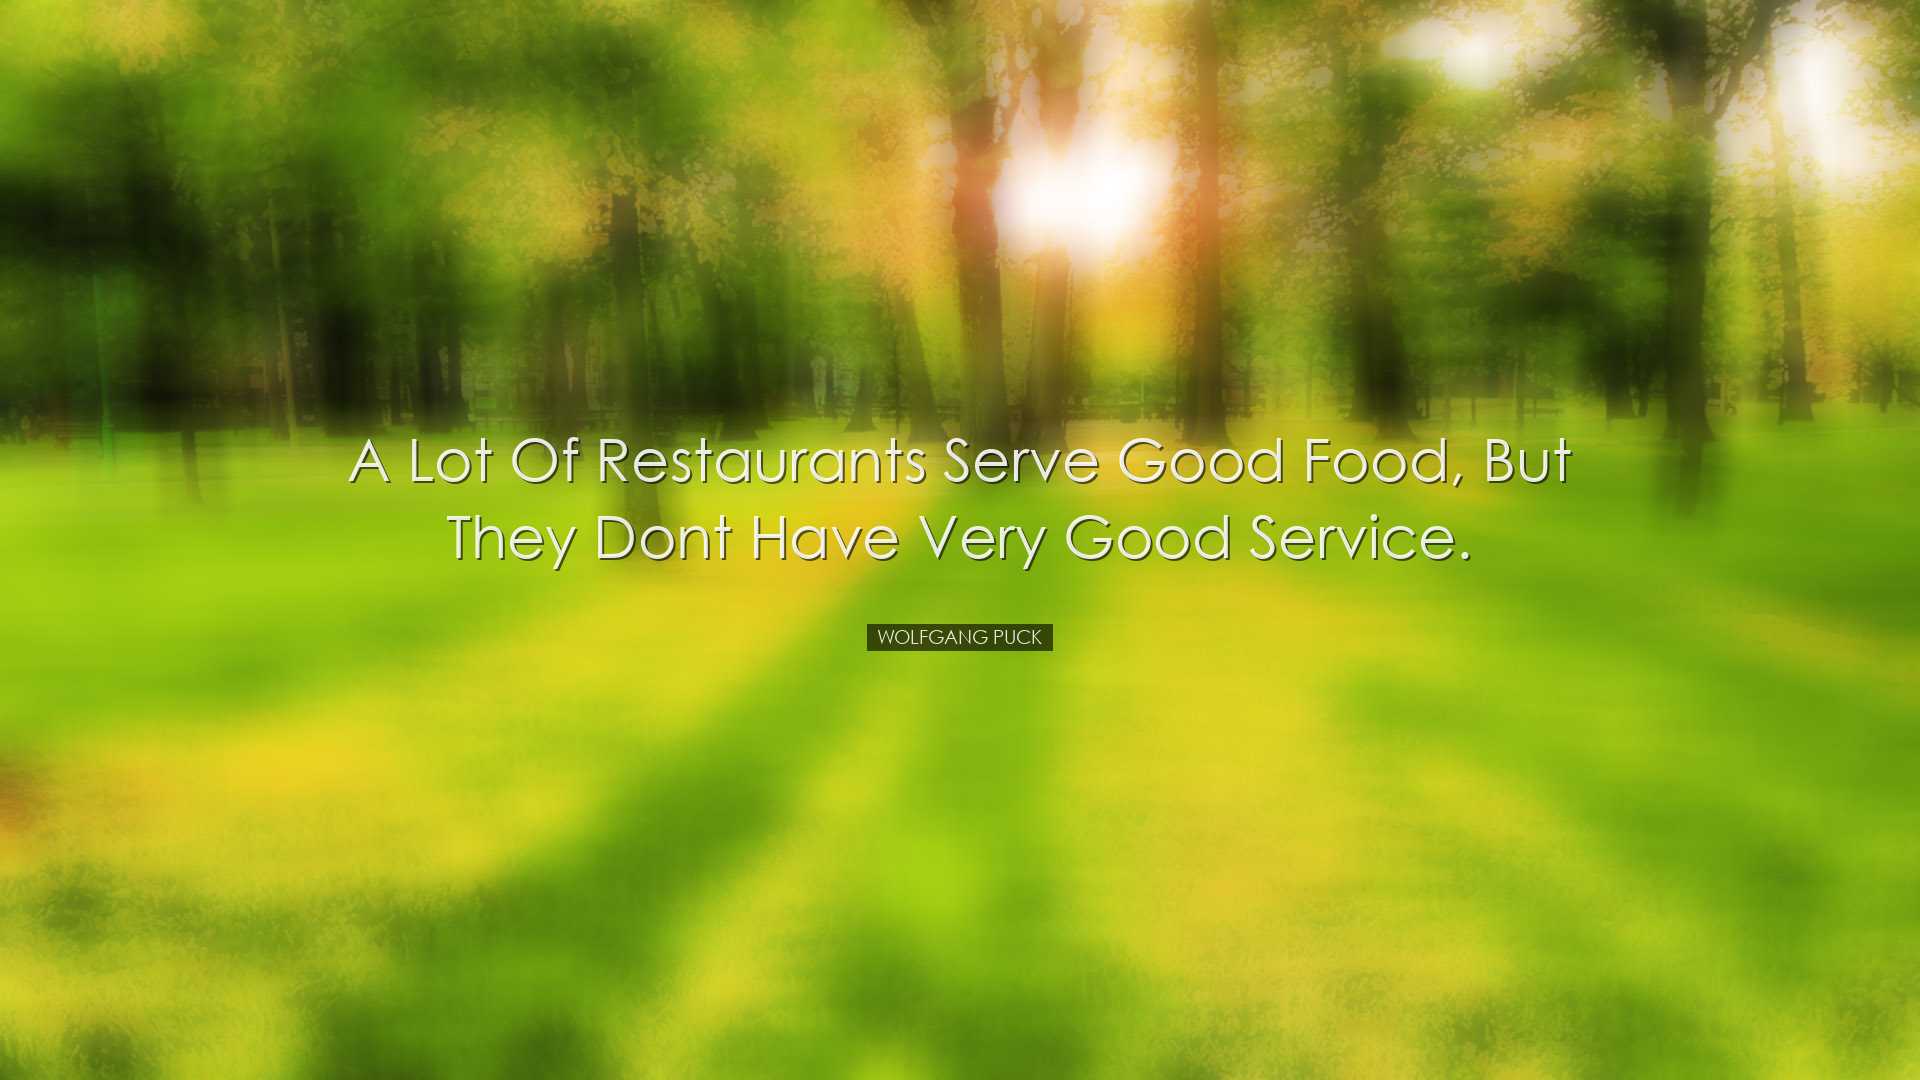 A lot of restaurants serve good food, but they dont have very good